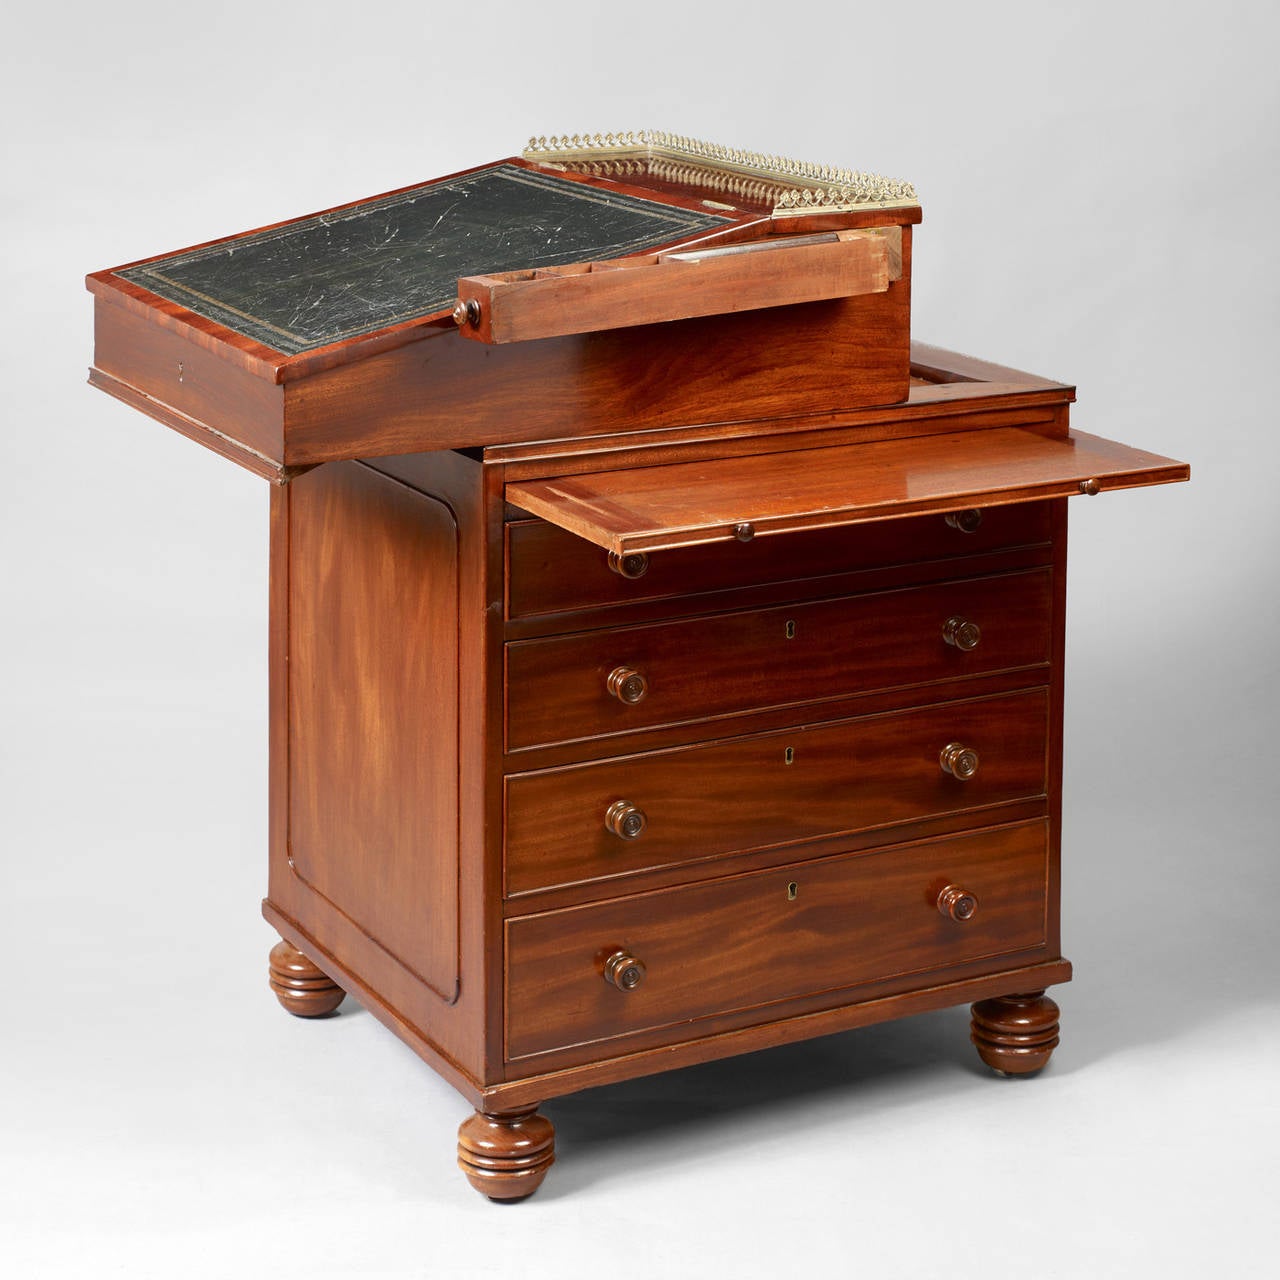 English, circa 1820-1830.
Figured mahogany, leather embossed writing surface.
Condition: Excellent condition, some wear to leather writing surface.
These fully developed mechanical desks became popular during the Regency period. This example is